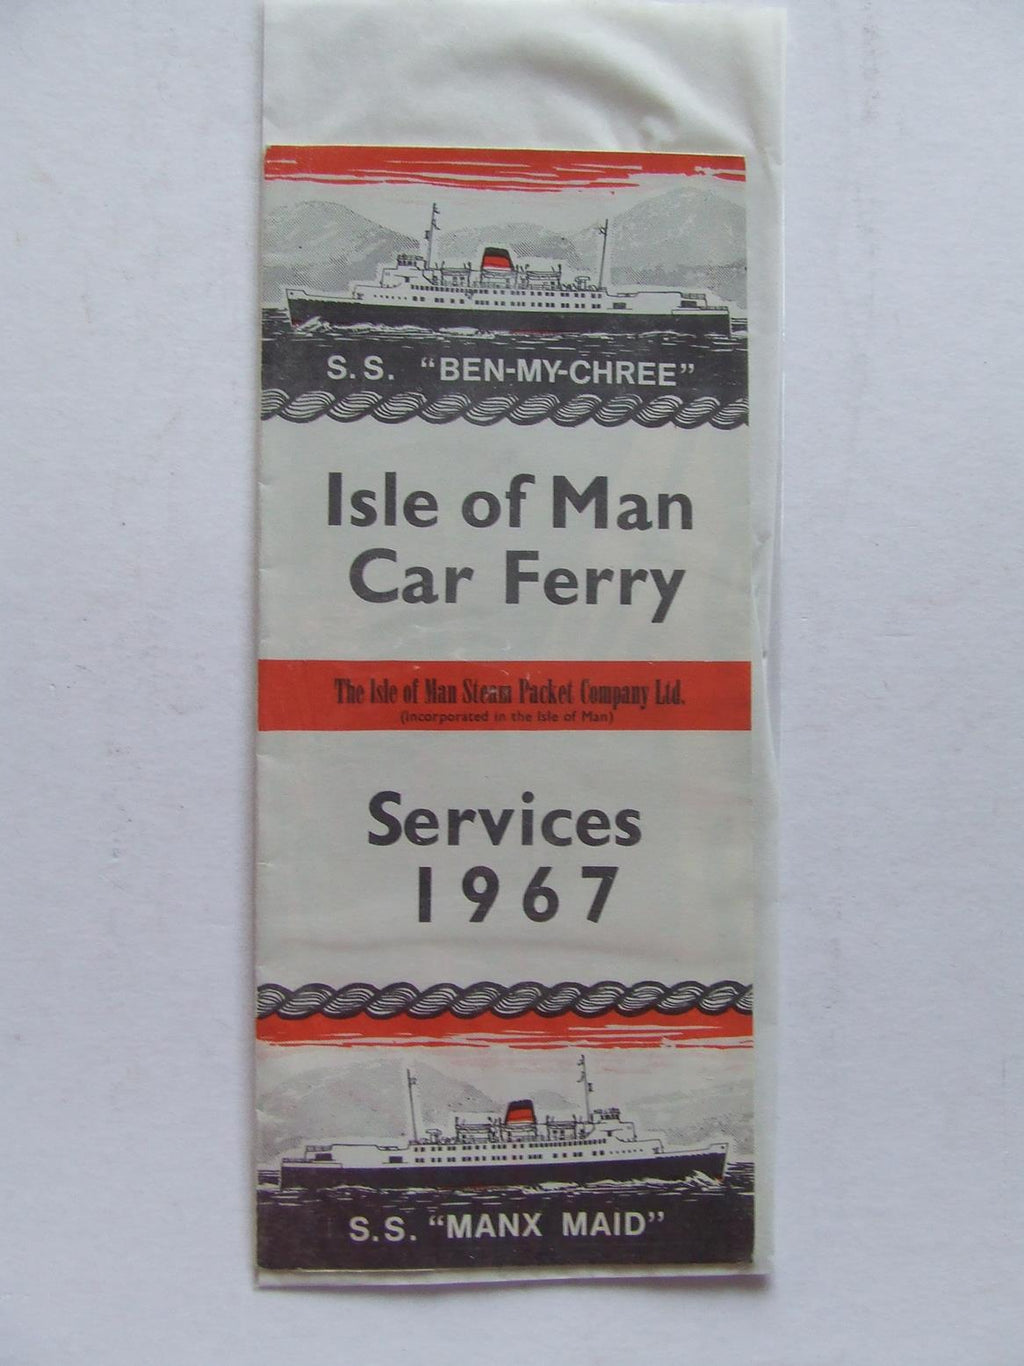 Isle of Man Car Ferry Services 1967 [from Liverpool and Ardrossan]